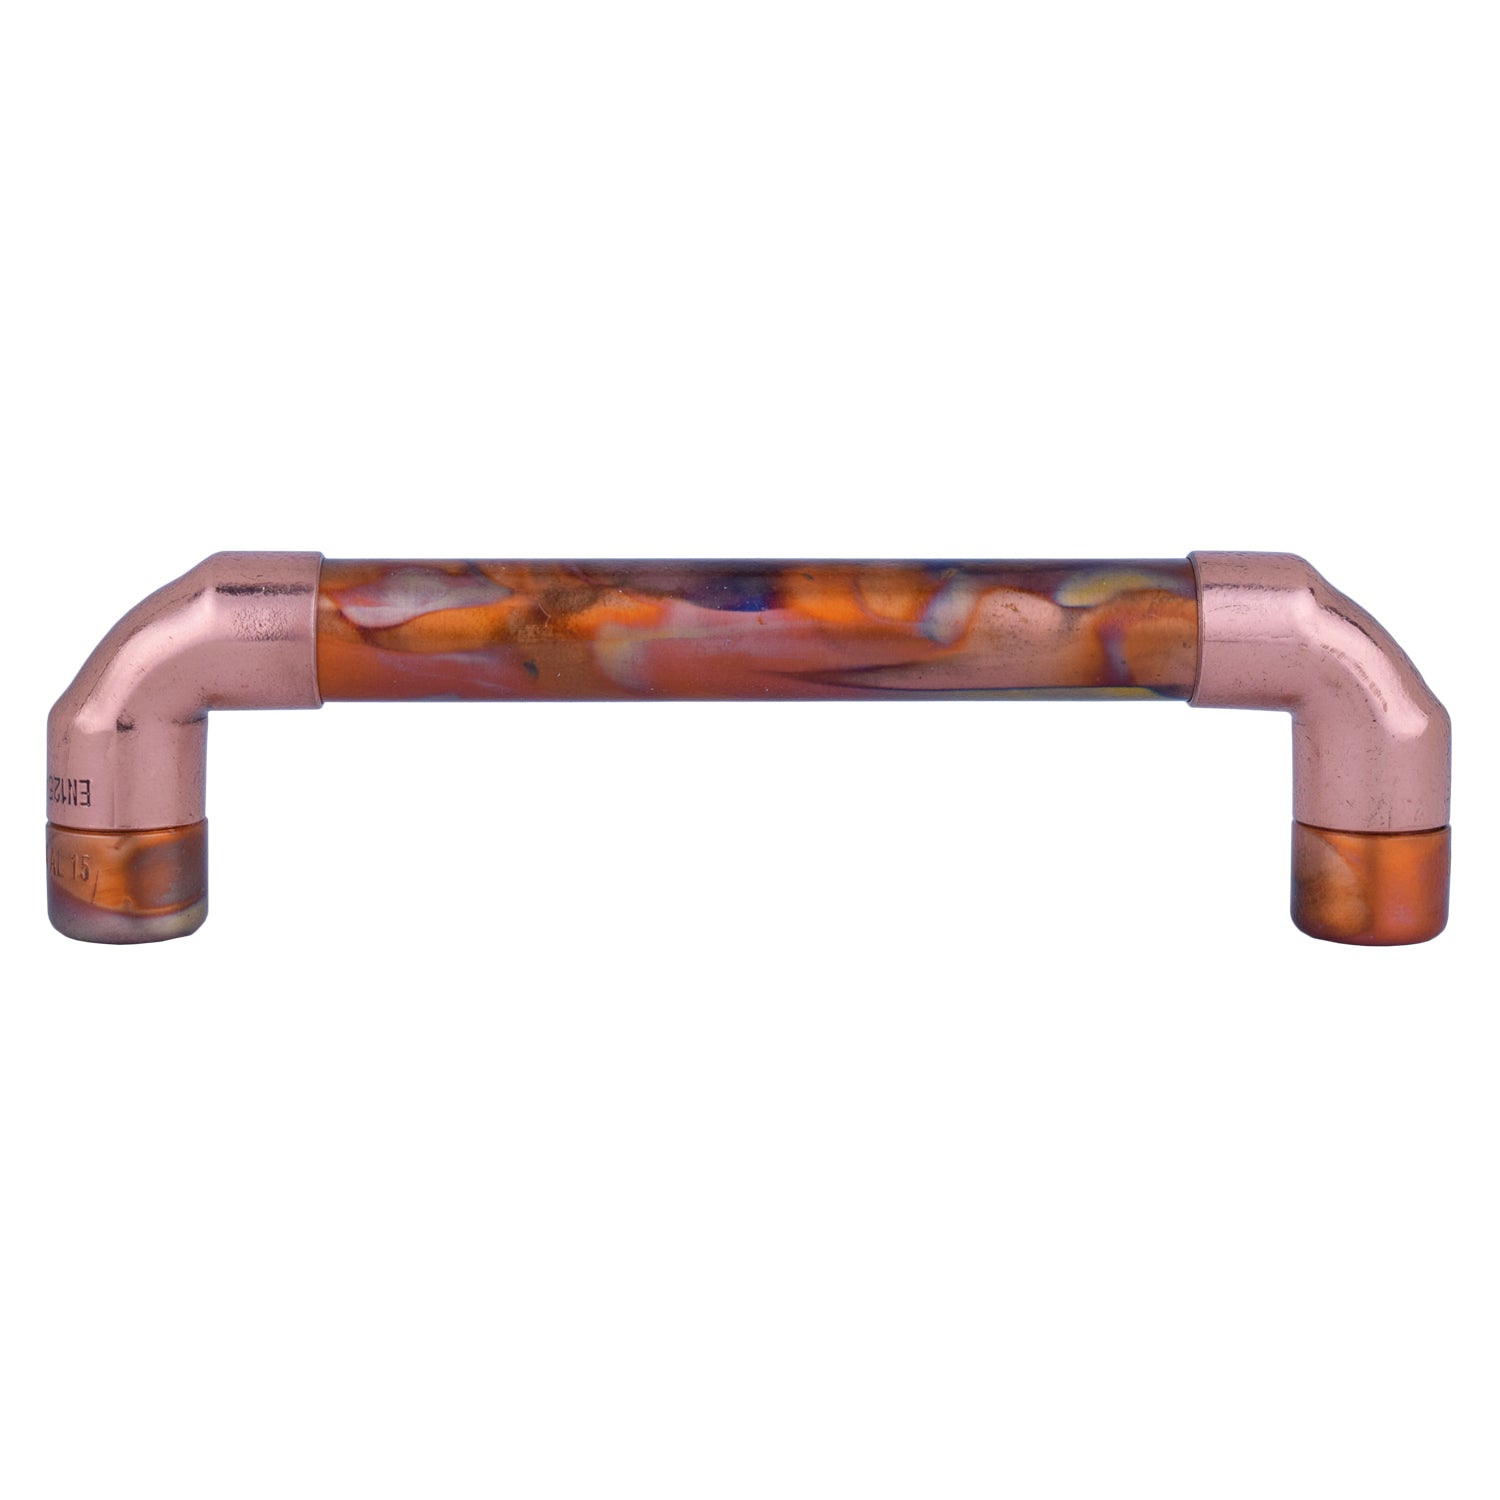 Copper Pull Handle - Marbled / High Polish Mix - On plain background